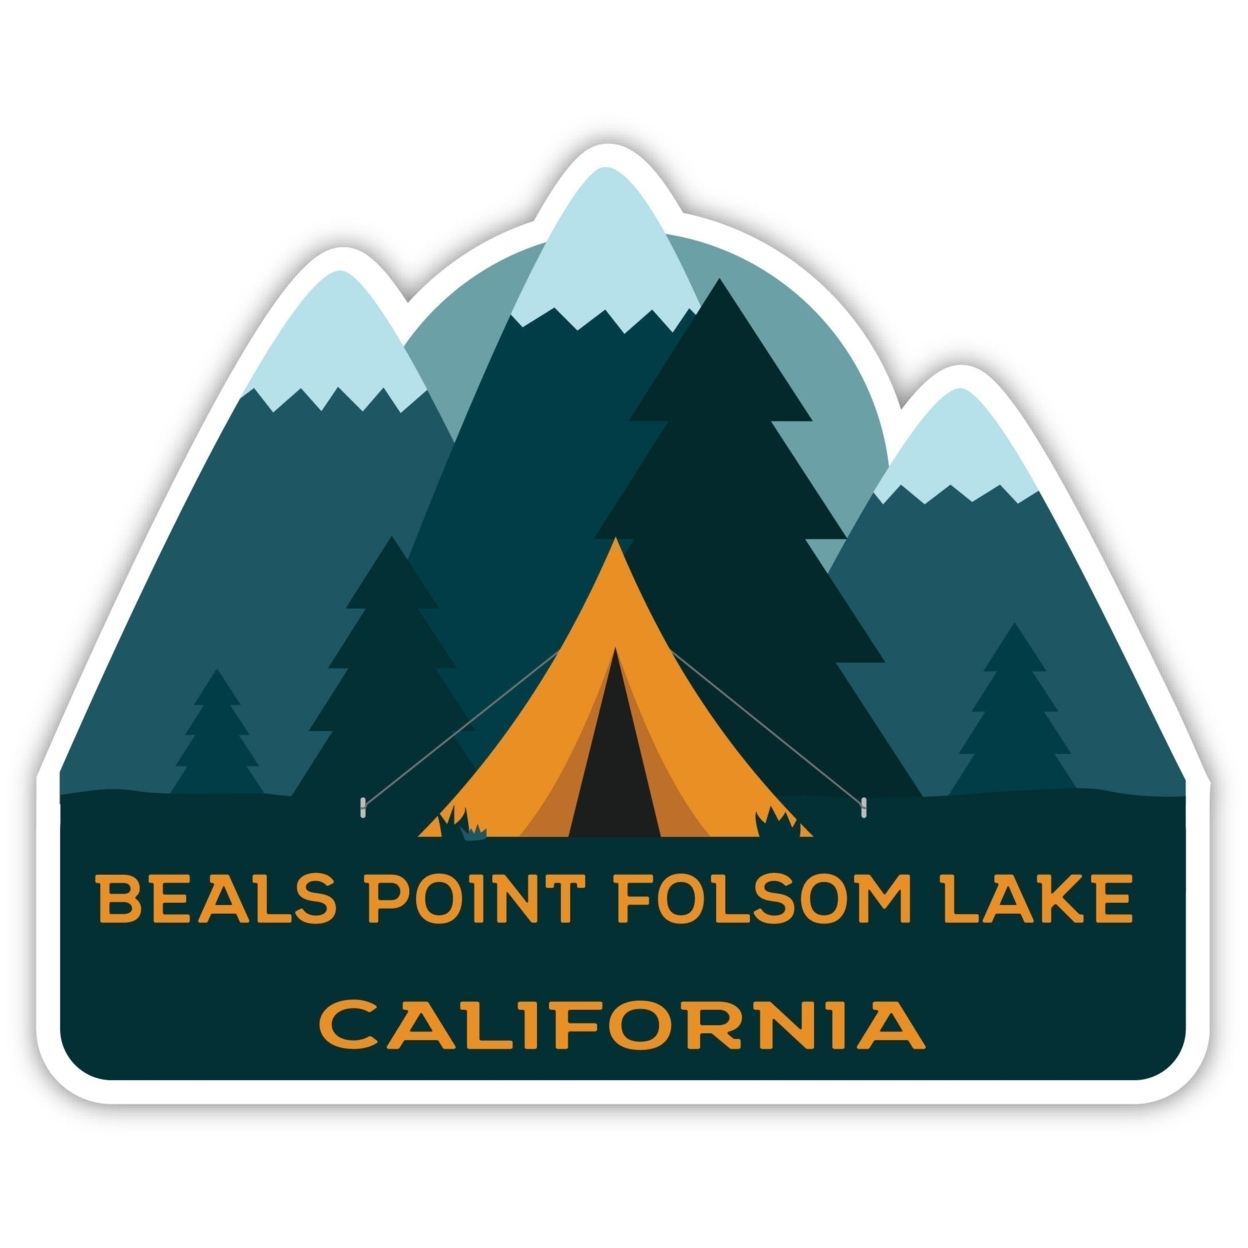 Beals Point Folsom Lake California Souvenir Decorative Stickers (Choose Theme And Size) - 4-Pack, 2-Inch, Bear